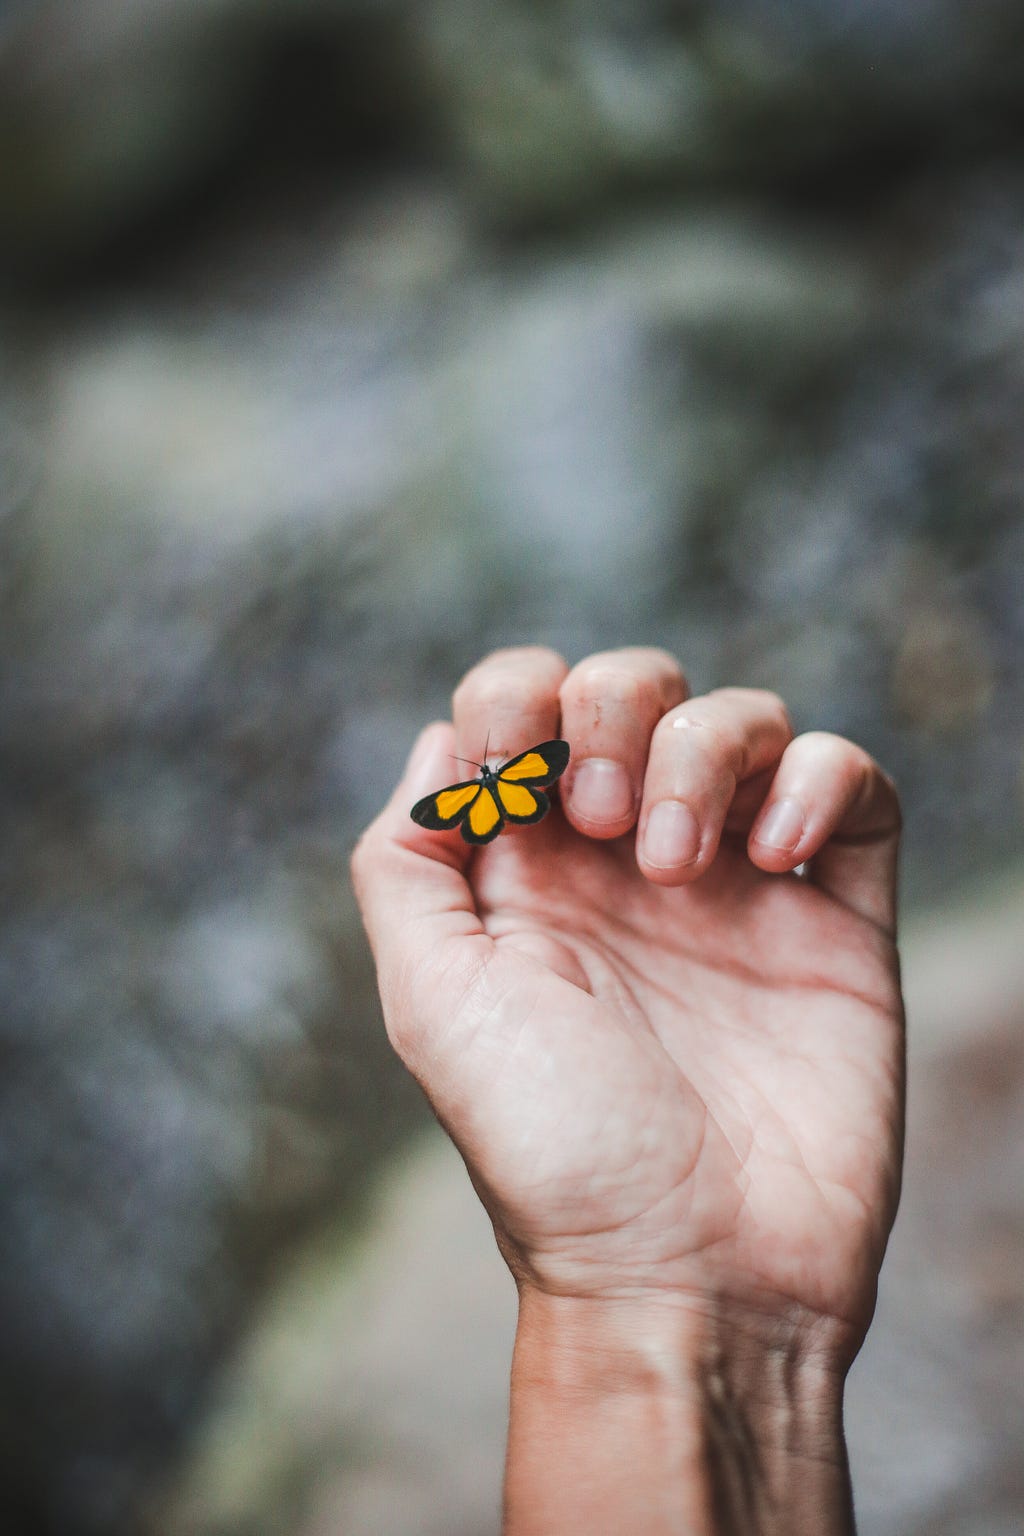 A picture of a hand, fingers curled, against a cloudy background with an orange and black butterfly sitting on the nail of the index finger.